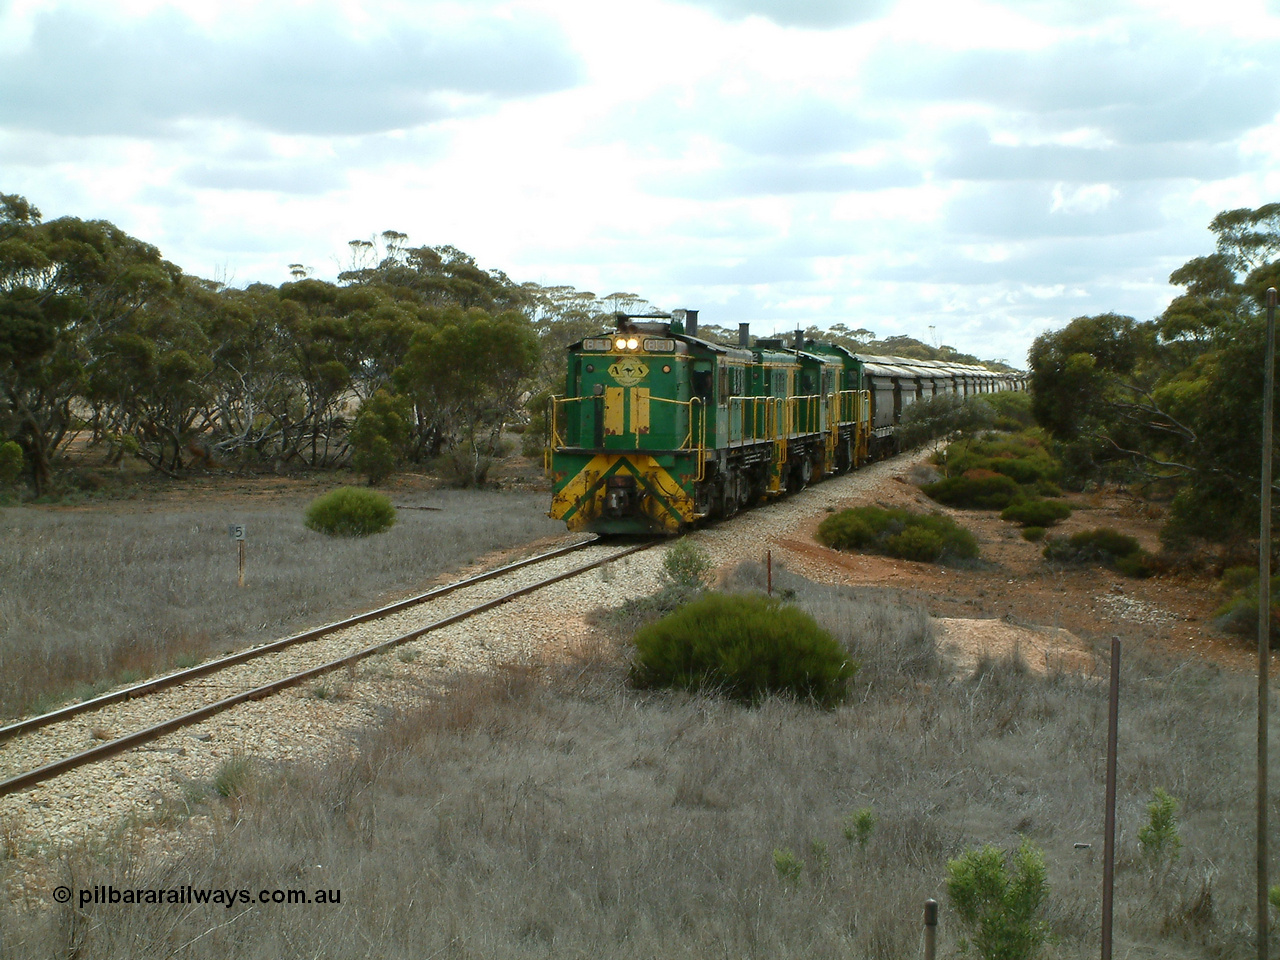 030409 115551
Darke Peake, at the 195 km Dog Fence Road grade crossing loaded grain train with 830 class unit 851 AE Goodwin ALCo model DL531 serial 84137, 851 has spent its entire operating career on the Eyre Peninsula, leads fellow 830 class 842 serial 84140 and a rebuilt unit DA 4, rebuilt from 830 class unit 839 by Port Augusta Workshops, retains original serial 83730 and model DL531 with the first twelve waggons behind the locos XNW type.
Keywords: 830-class;851;84137;AE-Goodwin;ALCo;DL531;